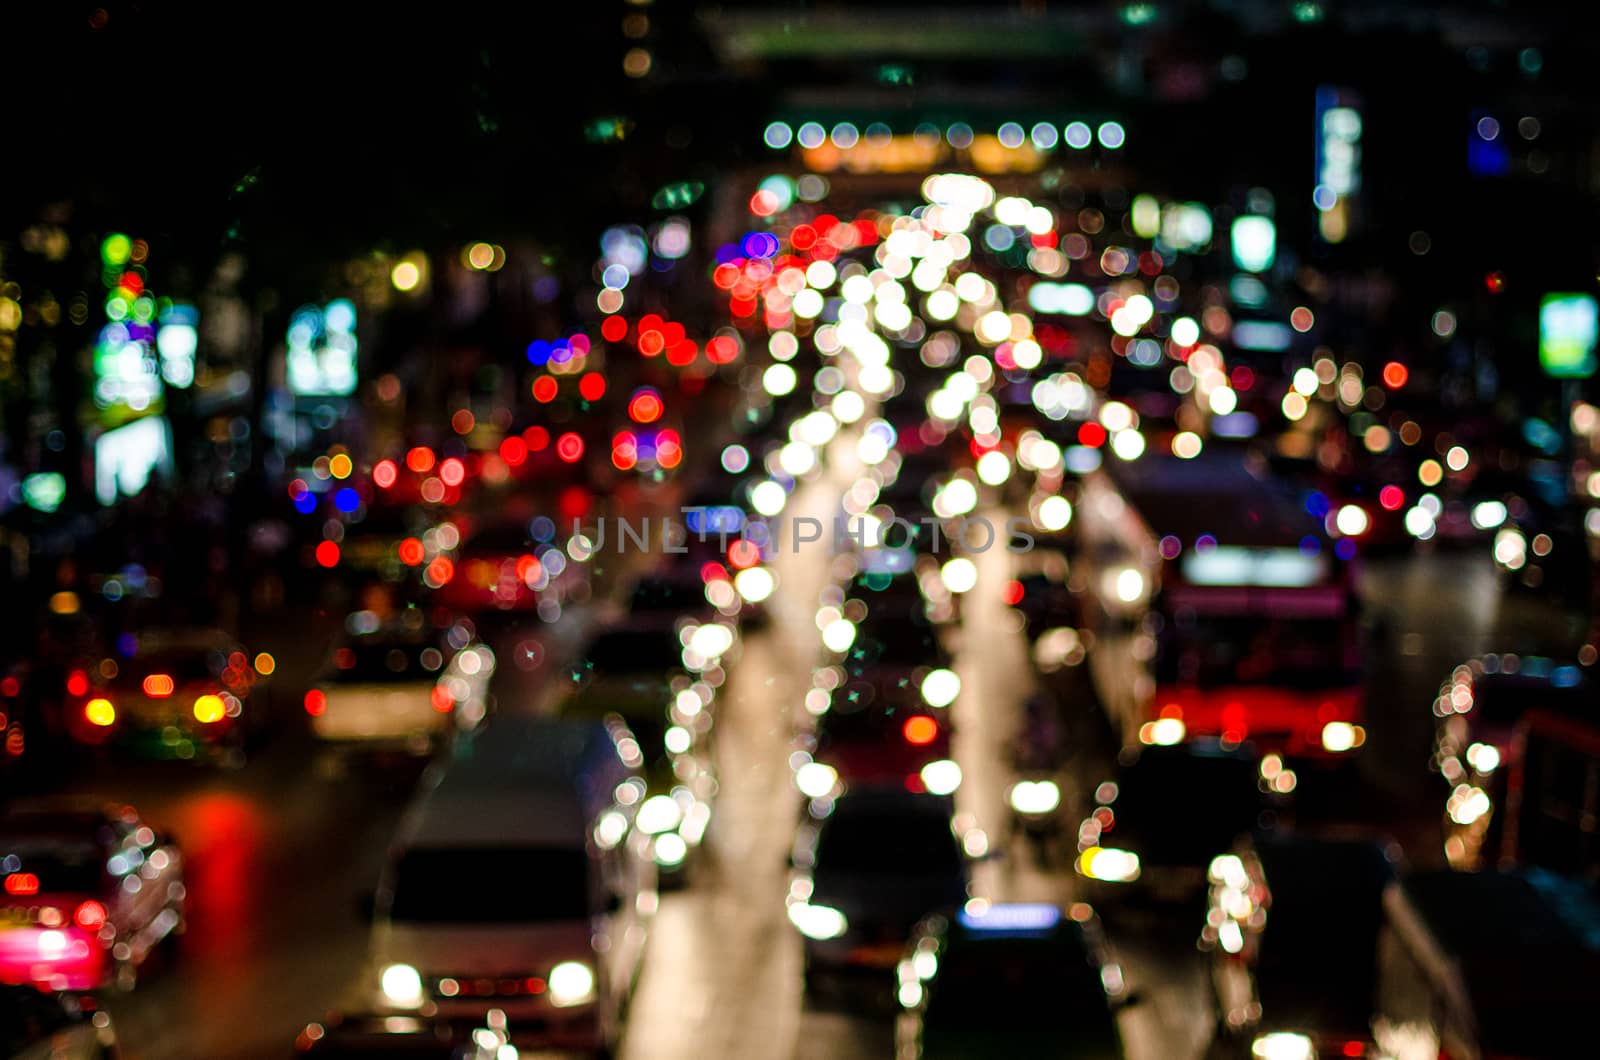 Abstract traffic lighting, Blurred by pixbox77